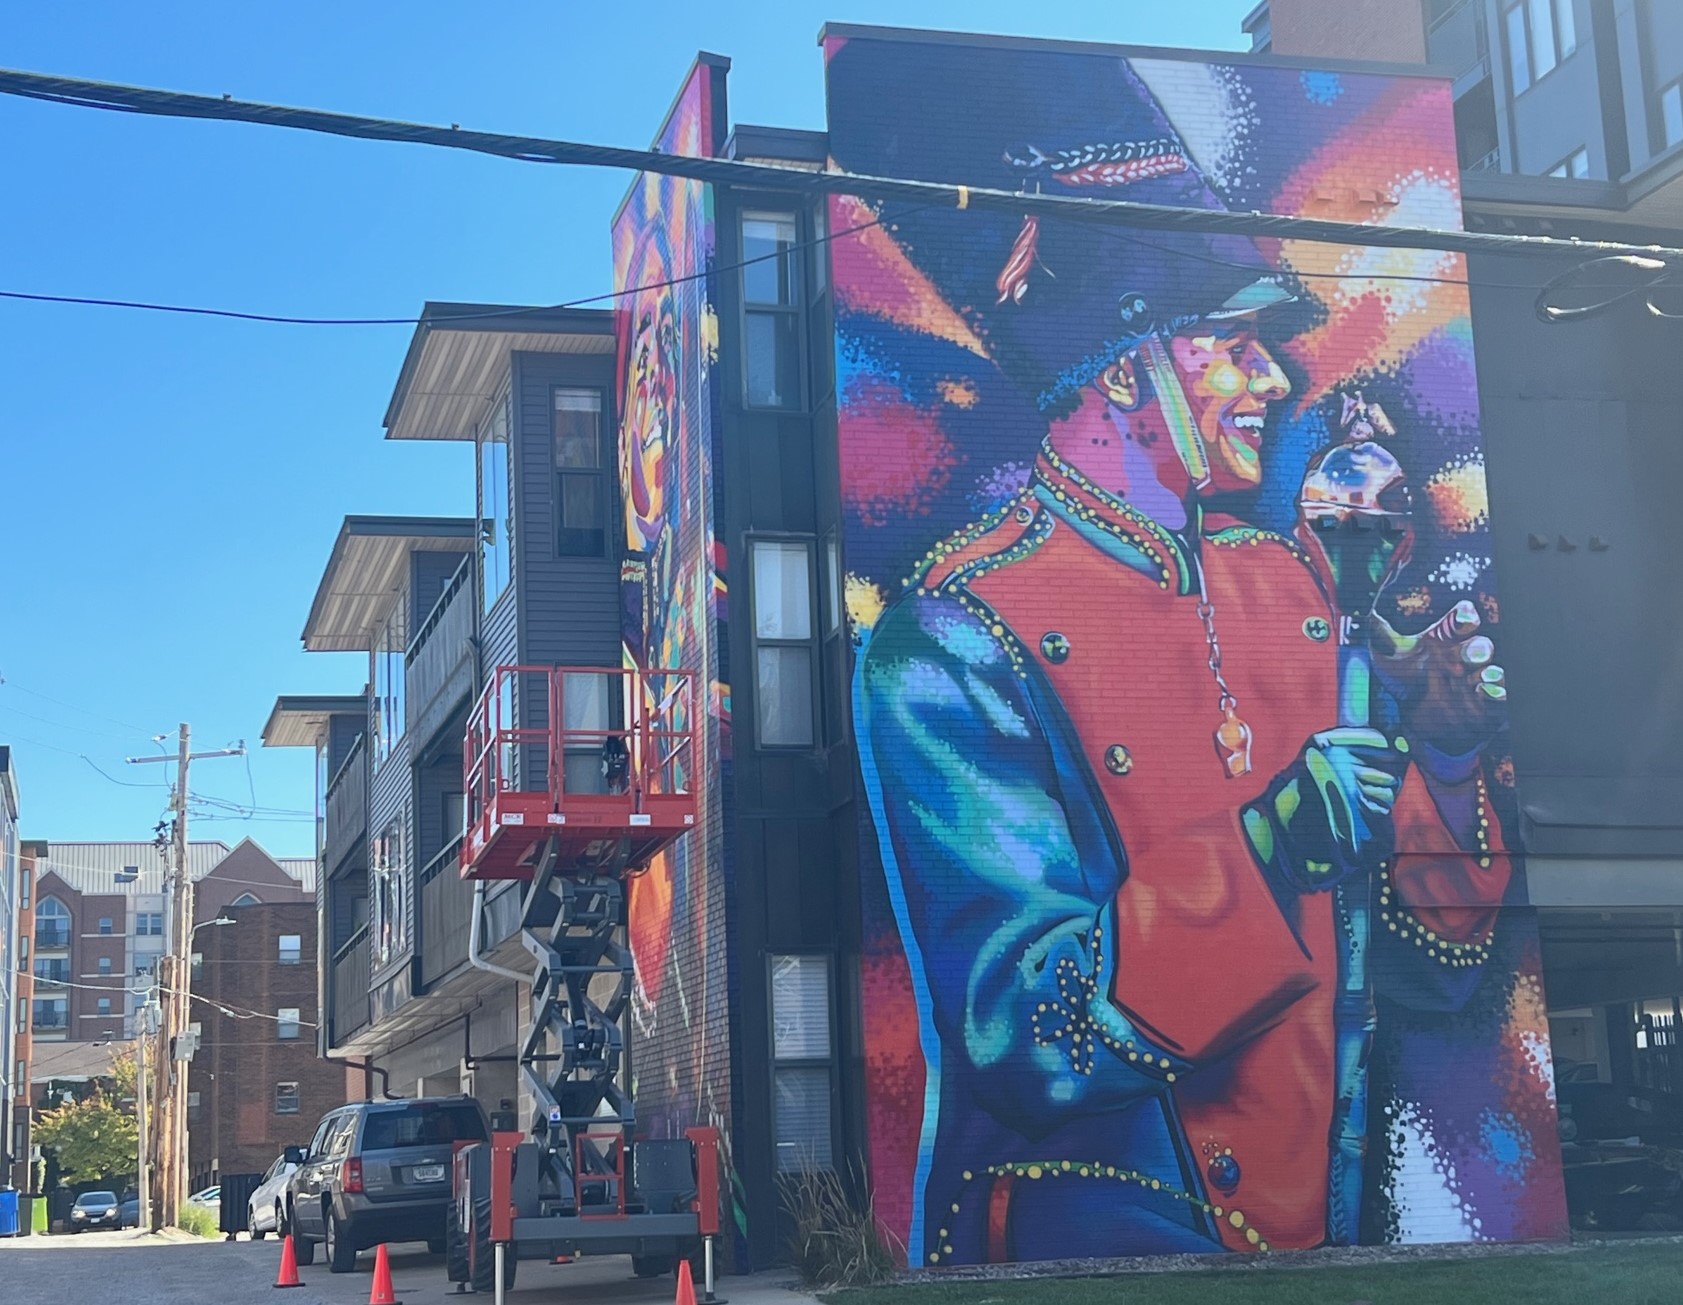 A brightly colored mural depicting a drum major in a marching band uniform stretches from the top to bottom of an apartment building.